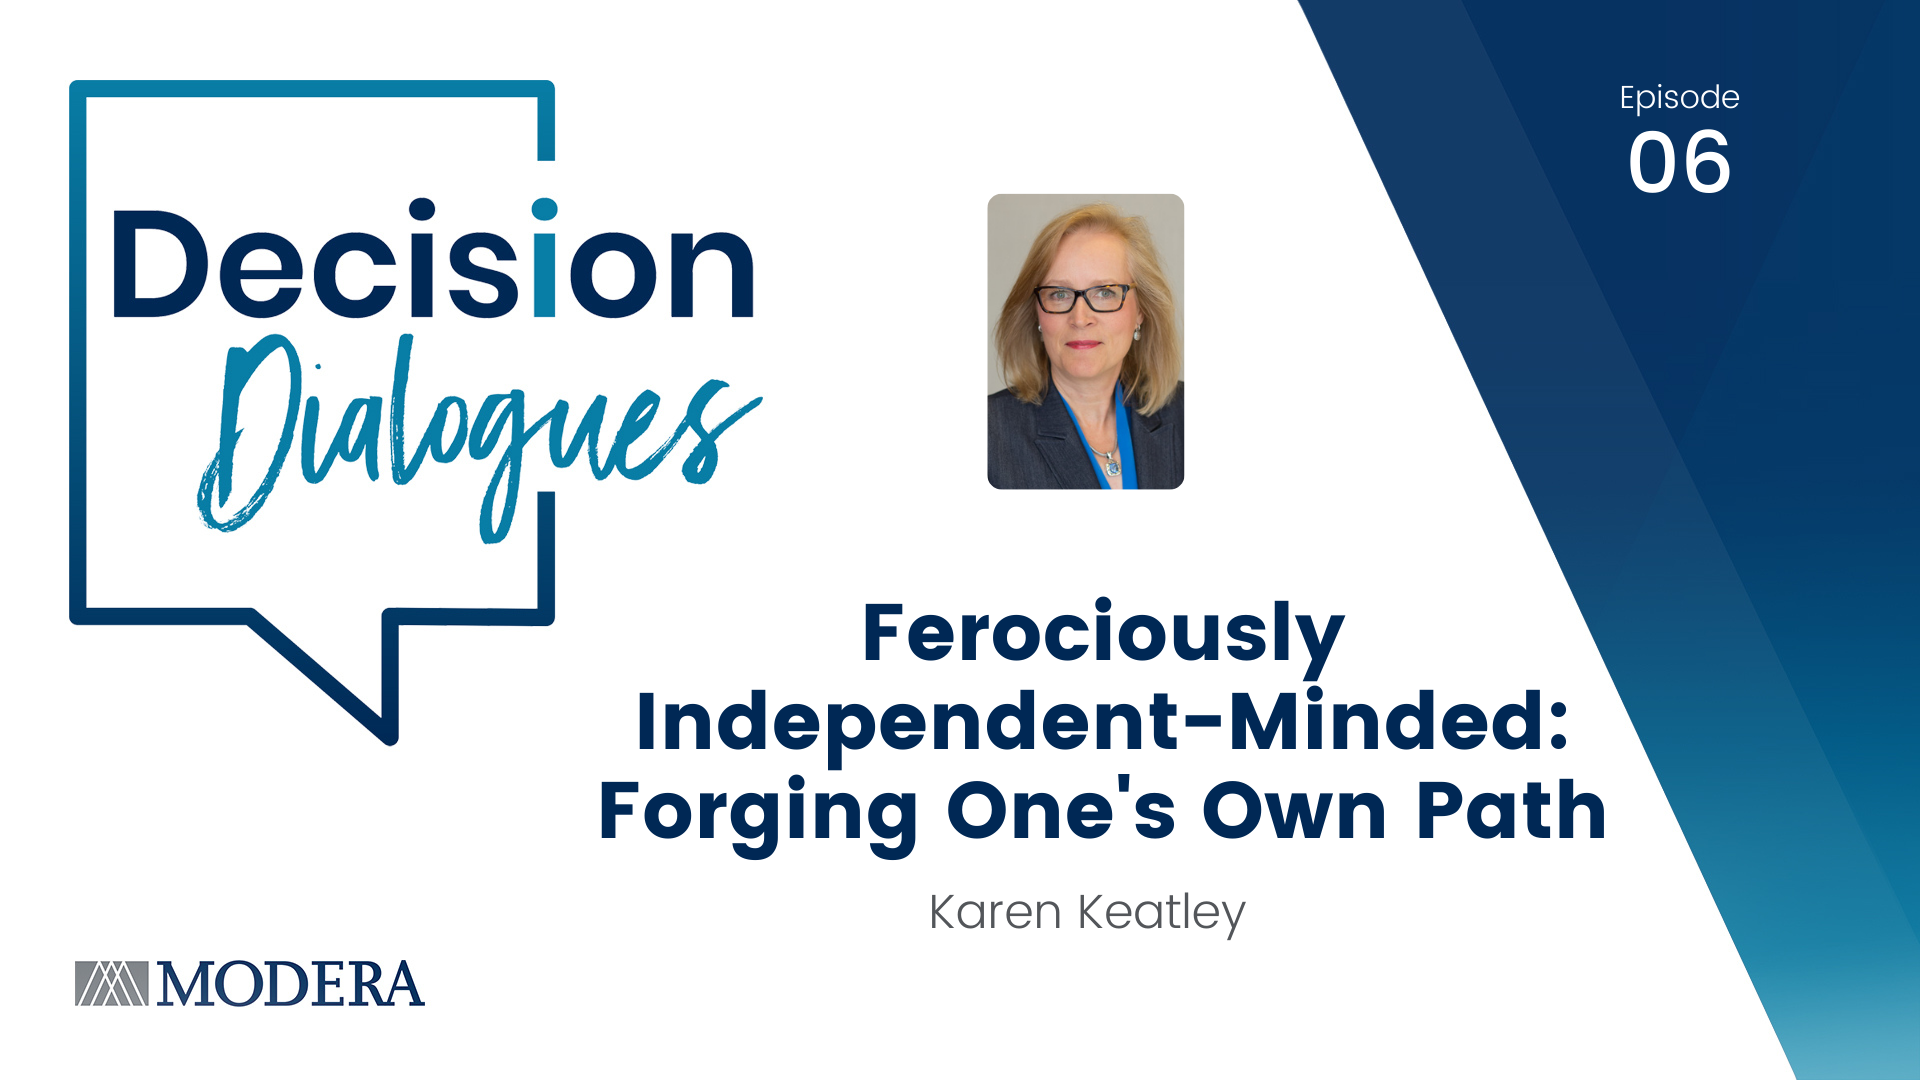 Decision Dialogues Episode 06 - Ferociously Independent-Minded: Forging One's Own Path with Karen Keatley